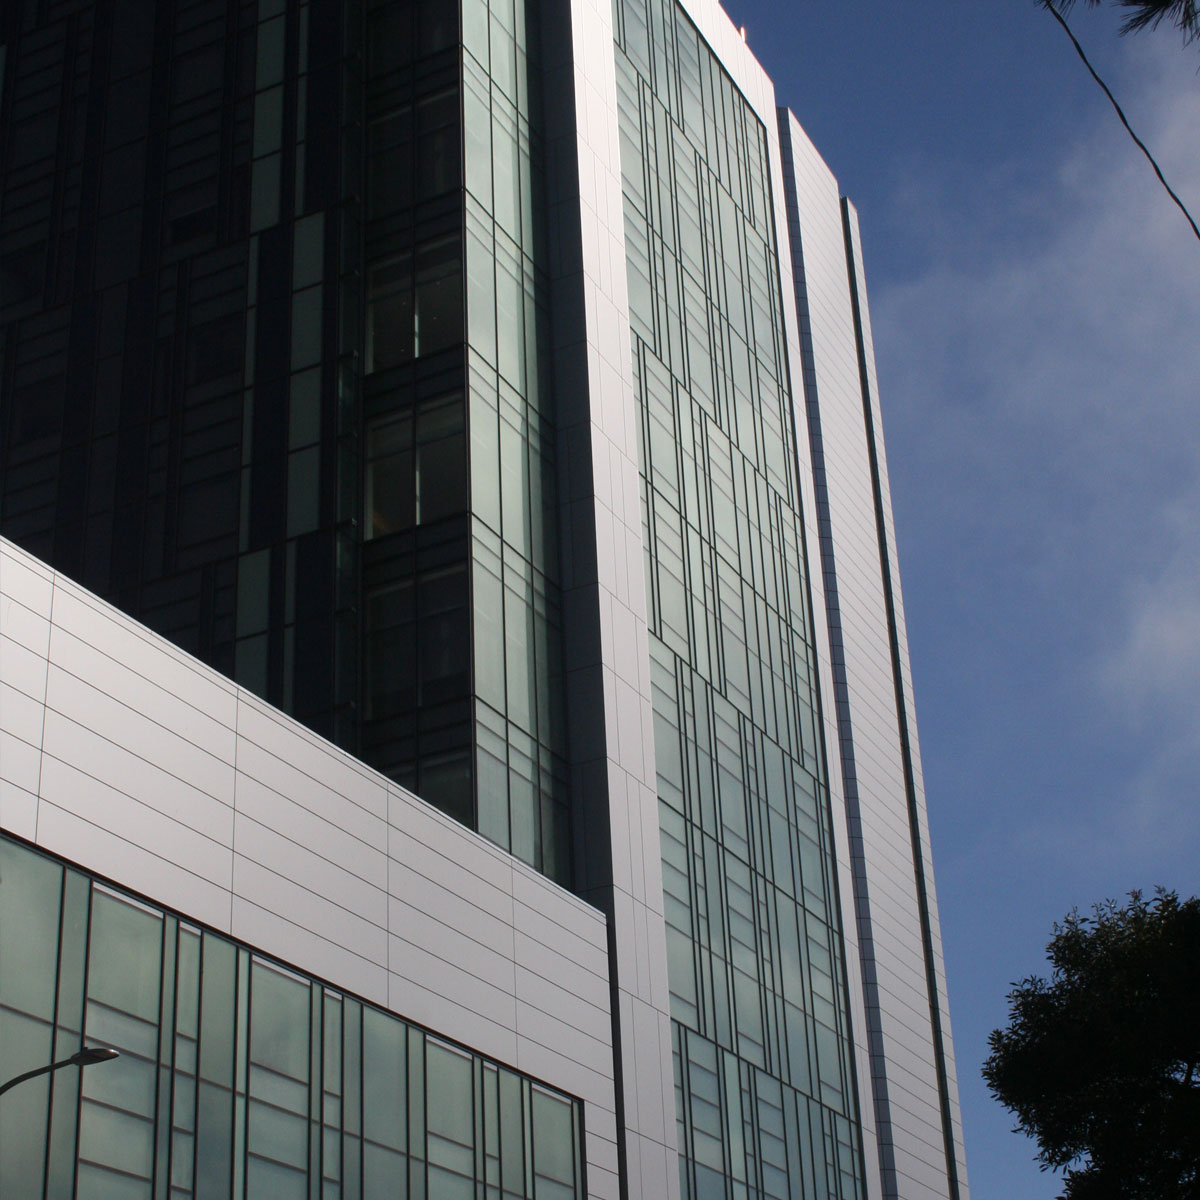 California Pacific Medical Center: Van Ness Geary Campus